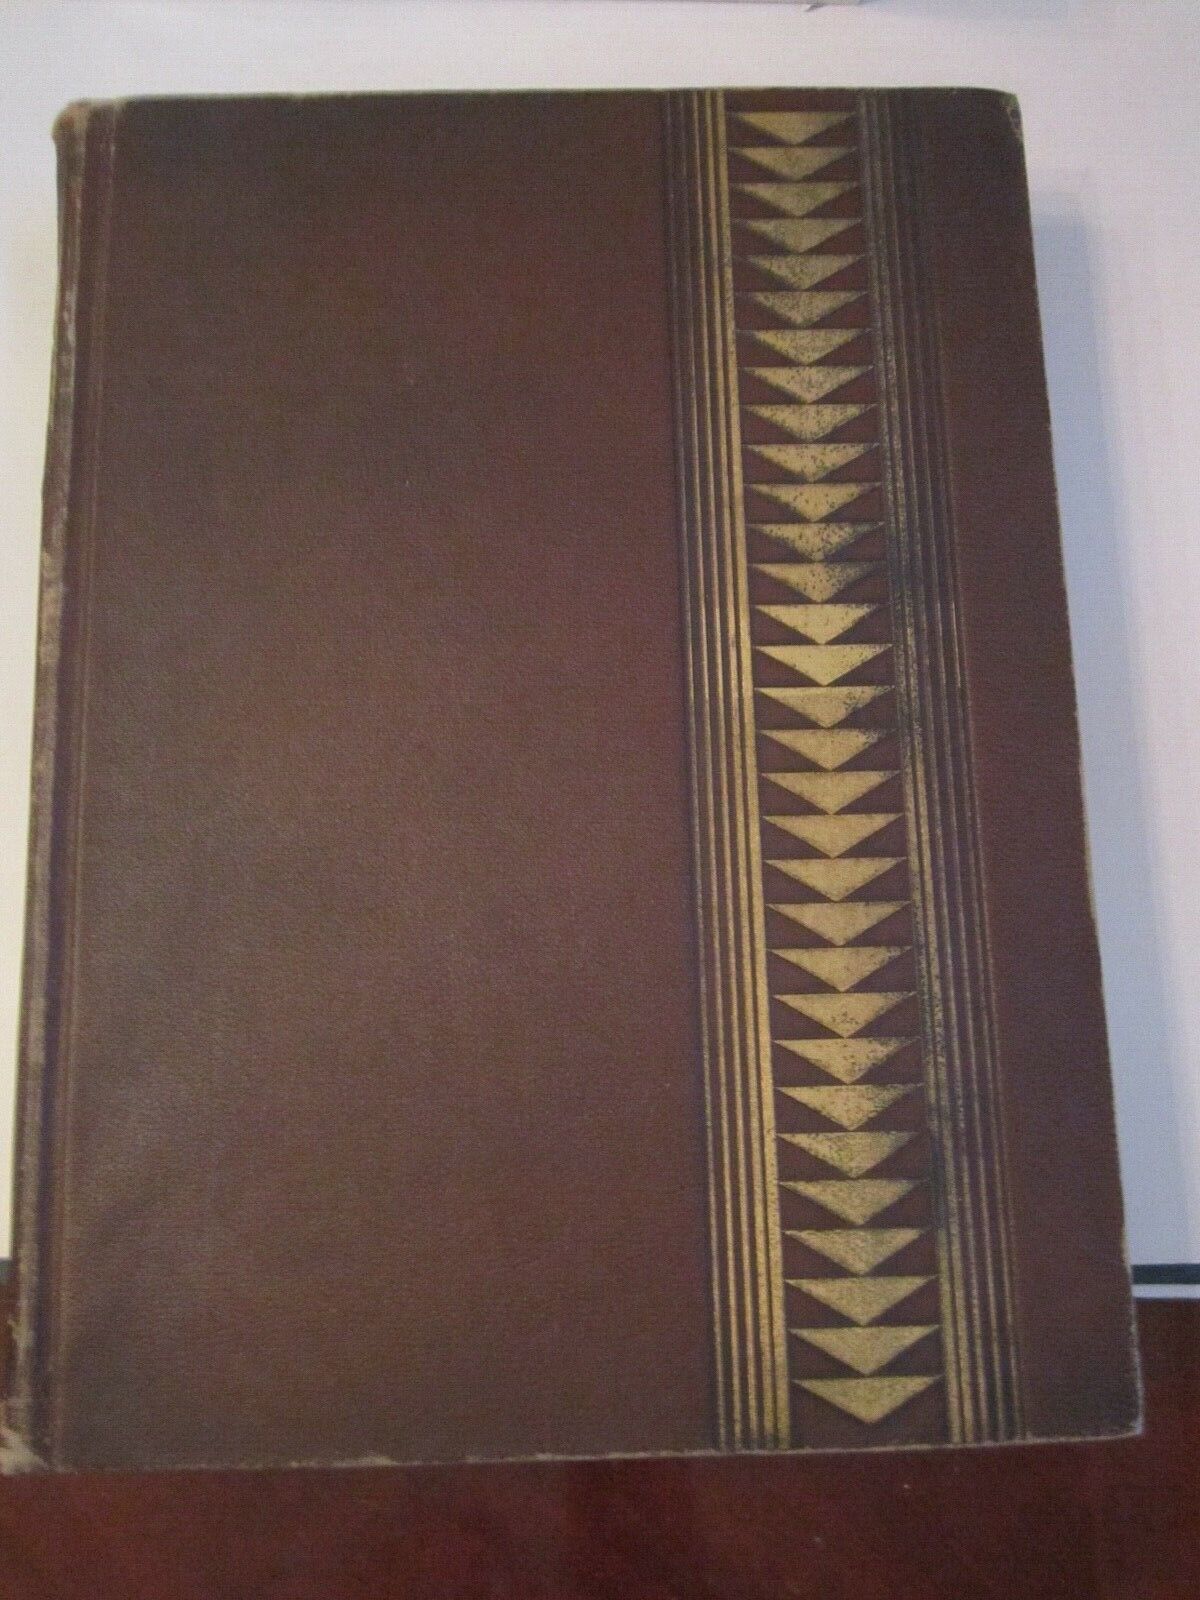 1929 THE UNIVERSITY OF CALIFORNIA YEAR BOOK - BLUE AND GOLD - VERY HEAVY